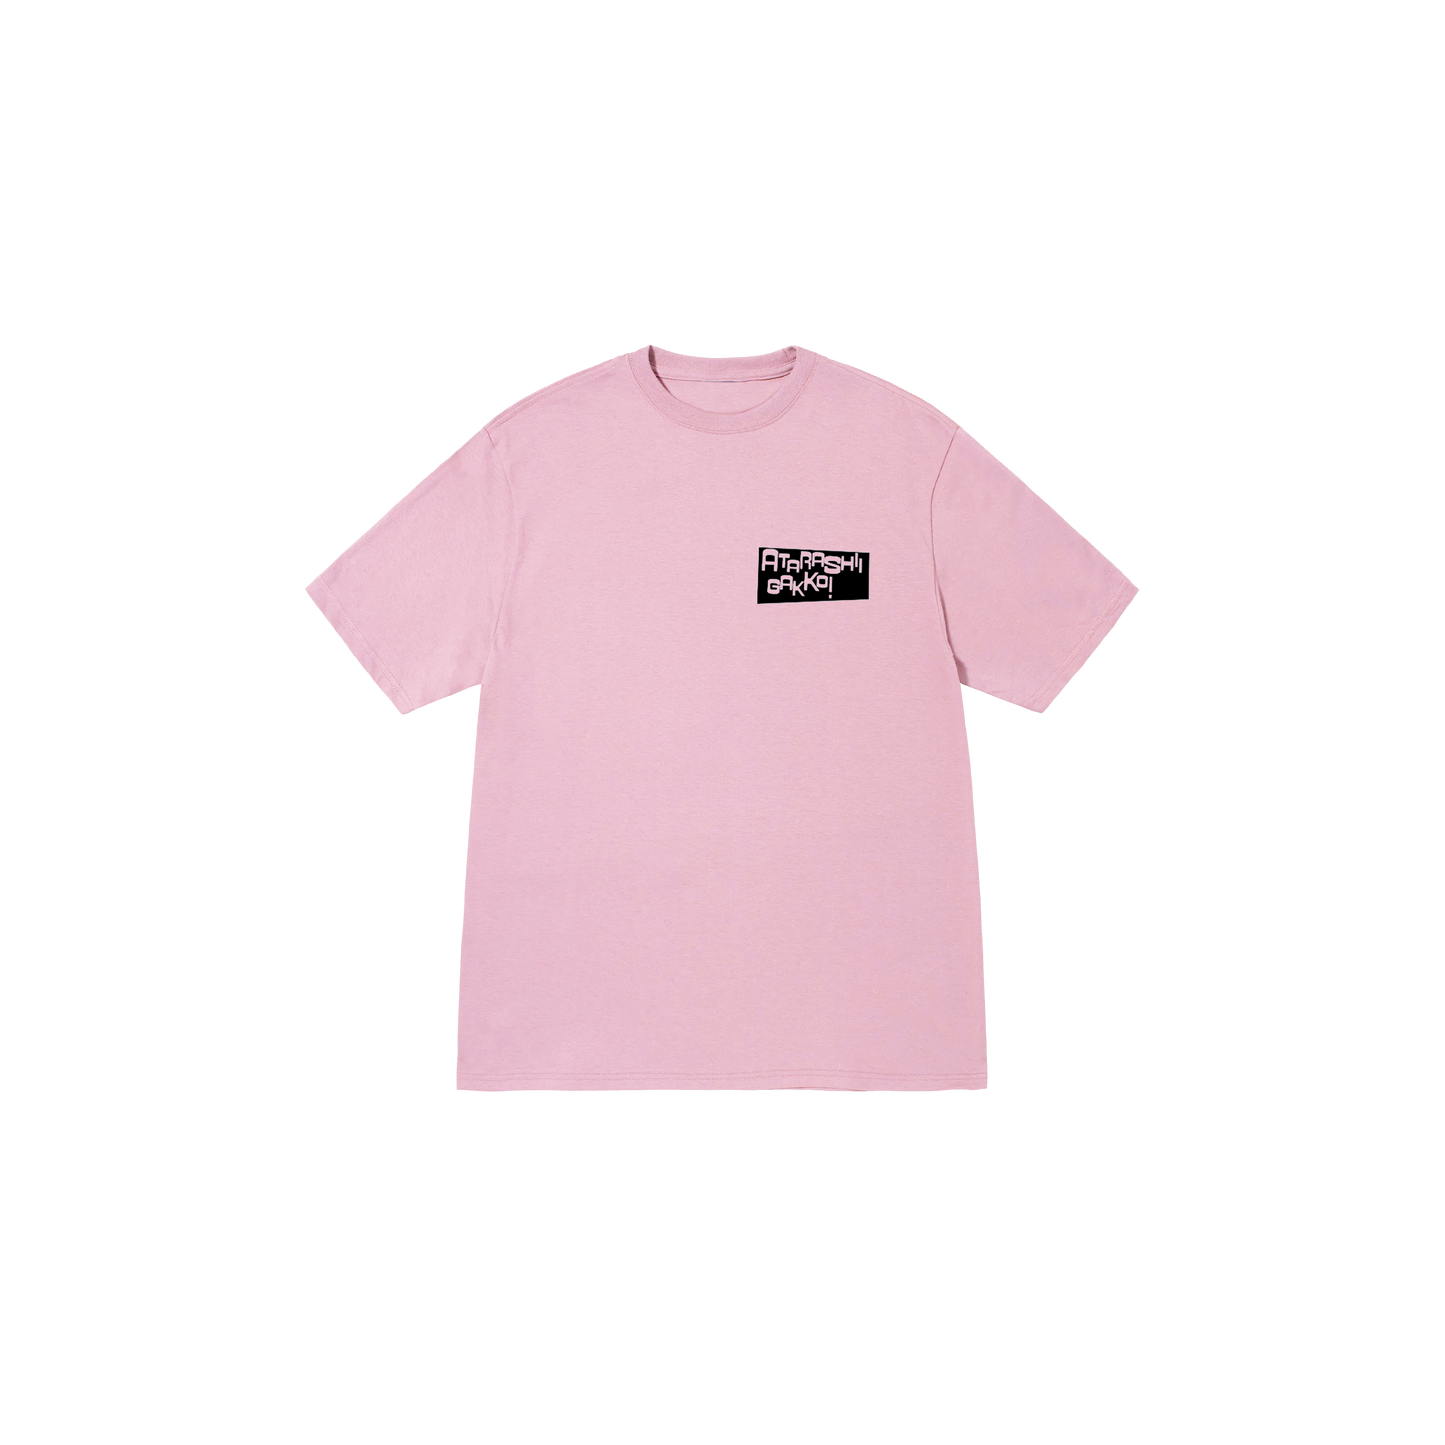 AG Limited Edition Pink Tee